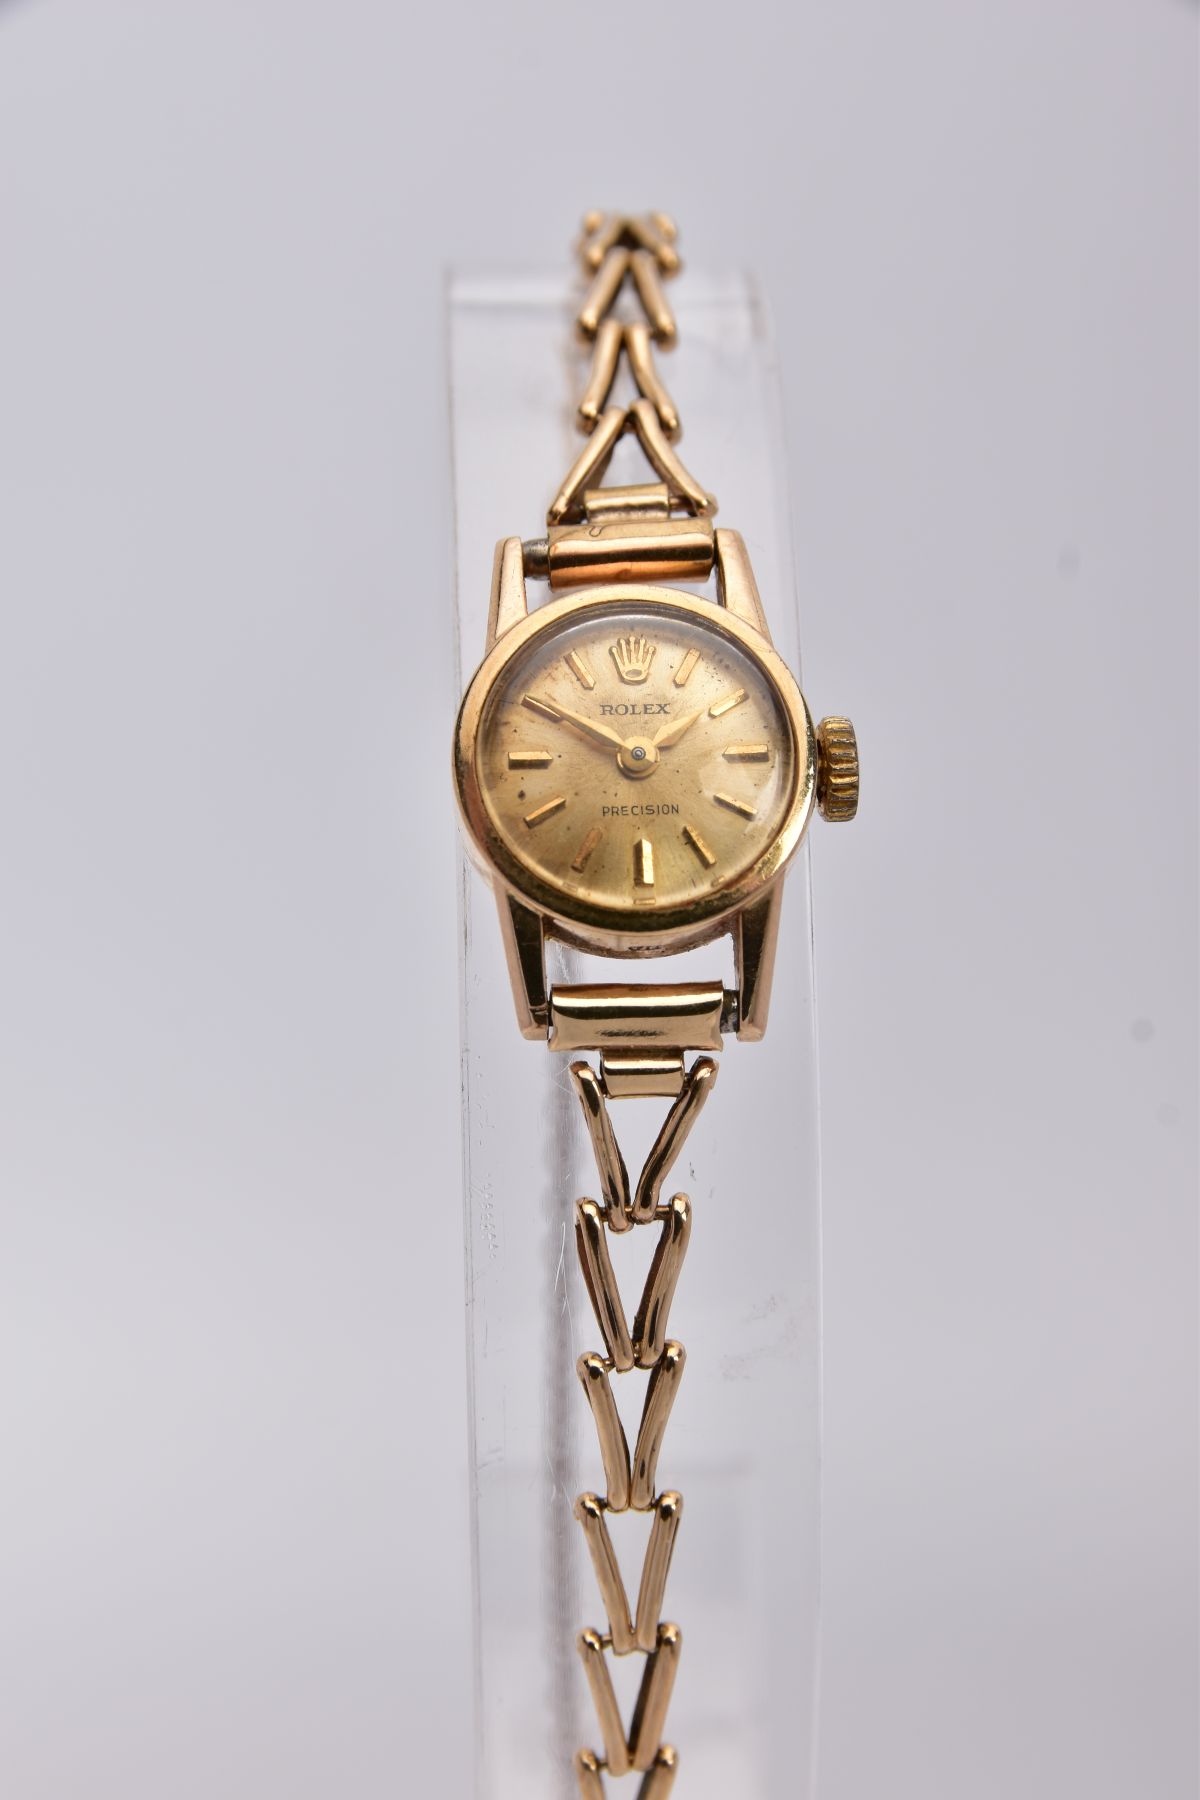 A LADIES 9CT GOLD ROLEX PRECISION WRISTWATCH, round case measuring approximately 16mm in diameter,